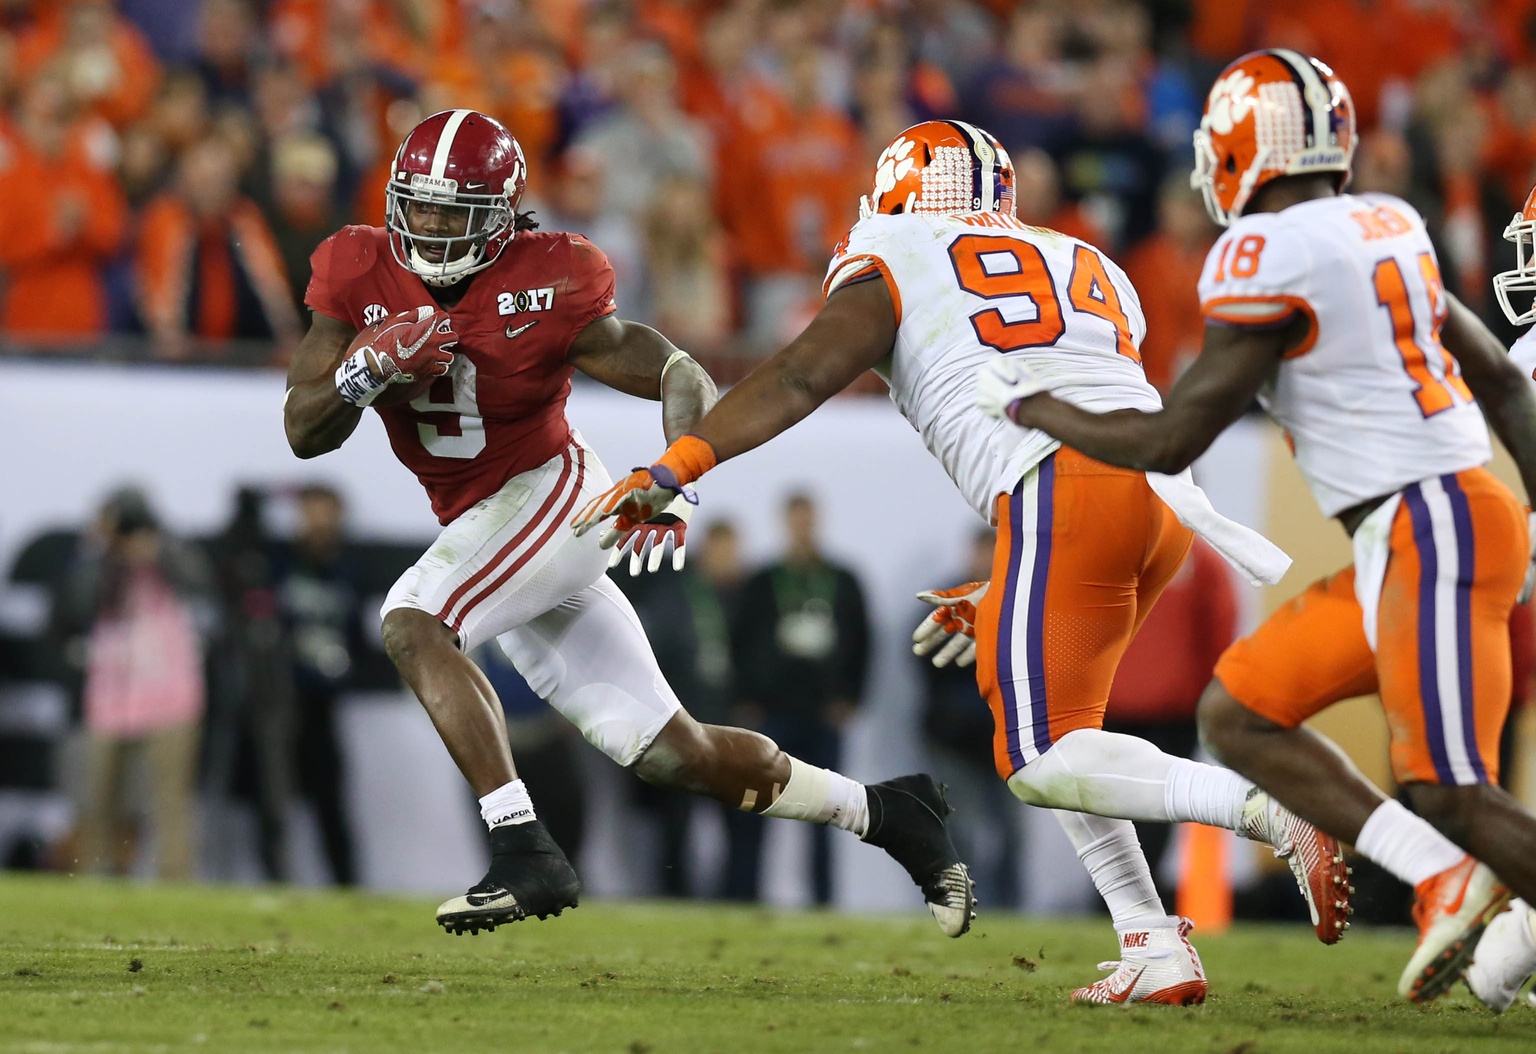 Jan 9, 2017; Tampa, FL, USA; Alabama Crimson Tide running back Bo Scarbrough (9) carries the ball past Clemson Tigers defensive tackle Carlos Watkins (94) in the 2017 College Football Playoff National Championship Game at Raymond James Stadium. Mandatory Credit: Matthew Emmons-USA TODAY Sports